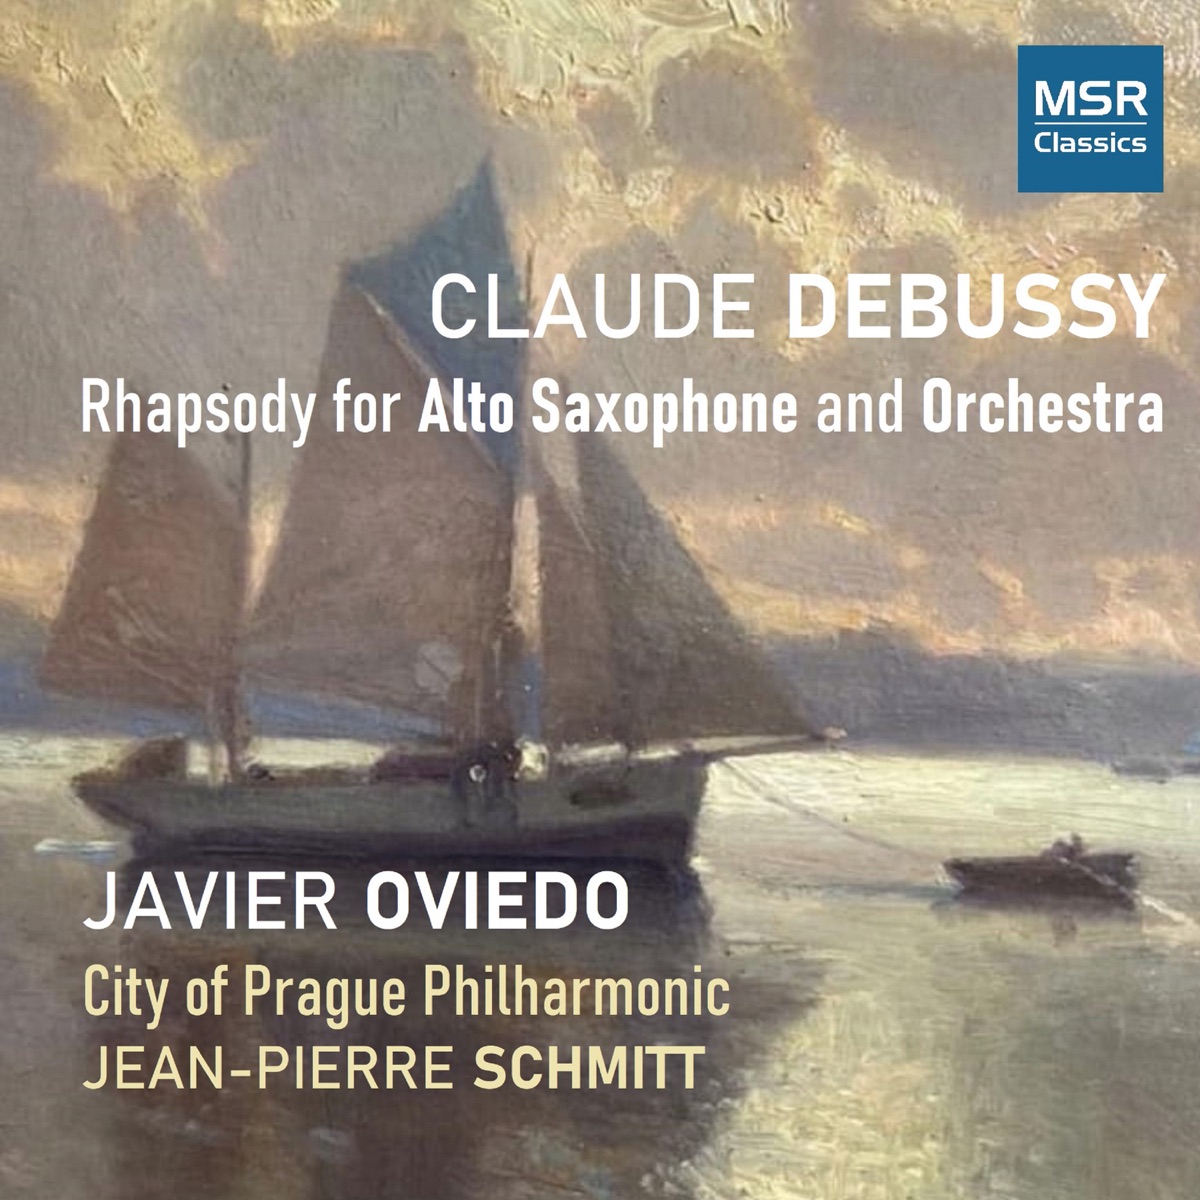 Claude Debussy: Rhapsody for Alto Saxophone and Orchestra - EP by Javier  Oviedo, The City of Prague Philharmonic Orchestra & Jean-Pierre Schmitt on  Apple Music